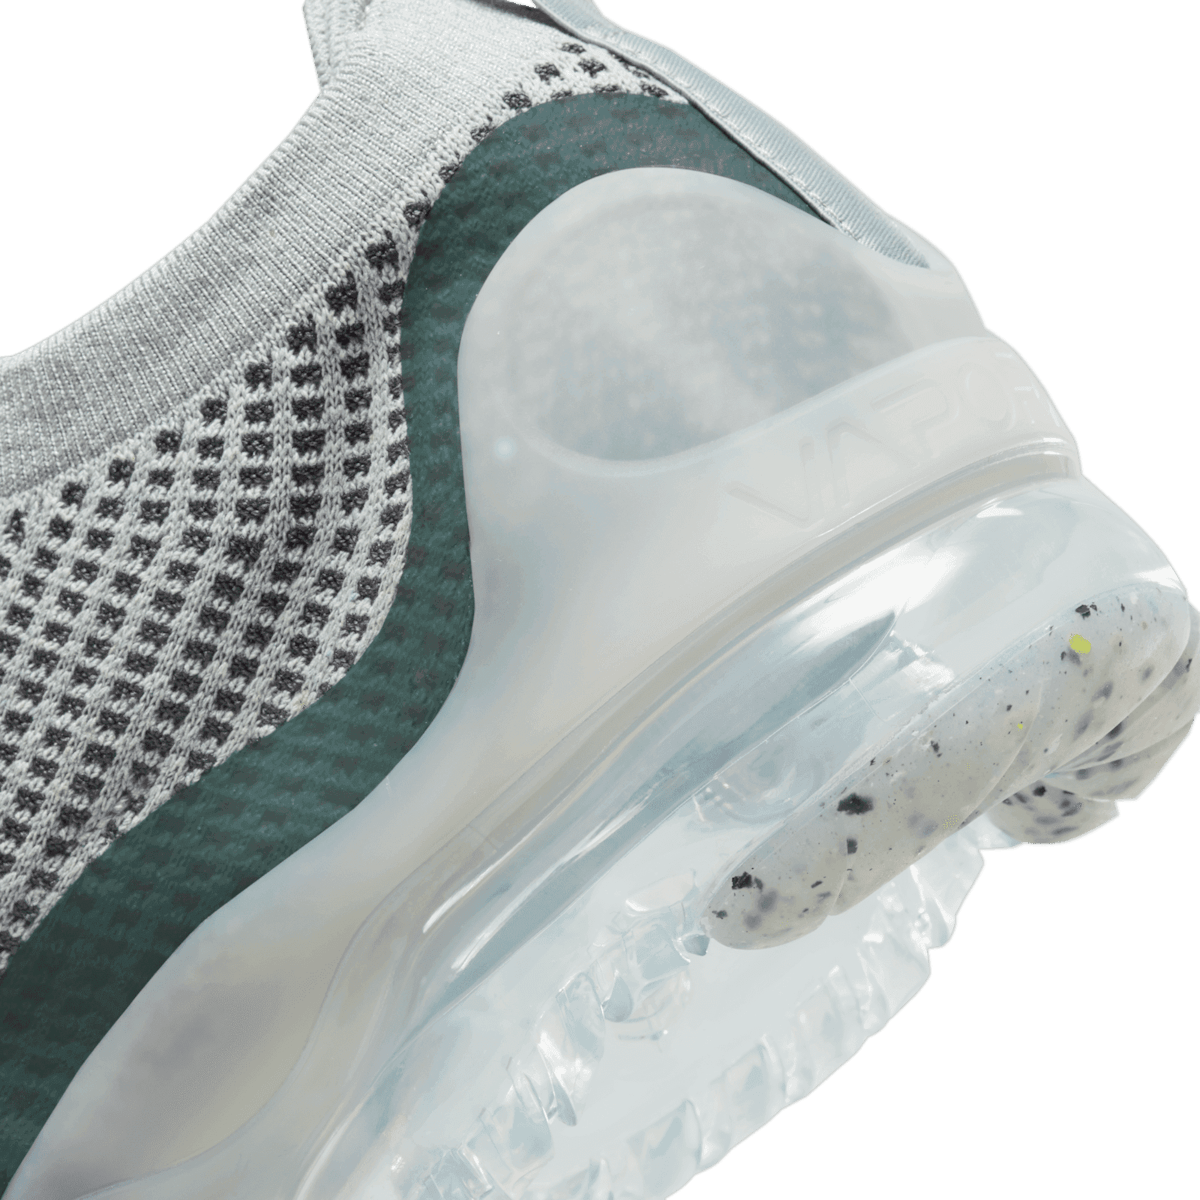 Nike Air VaporMax 2021 FK SE Shoes in Grey Angle 5